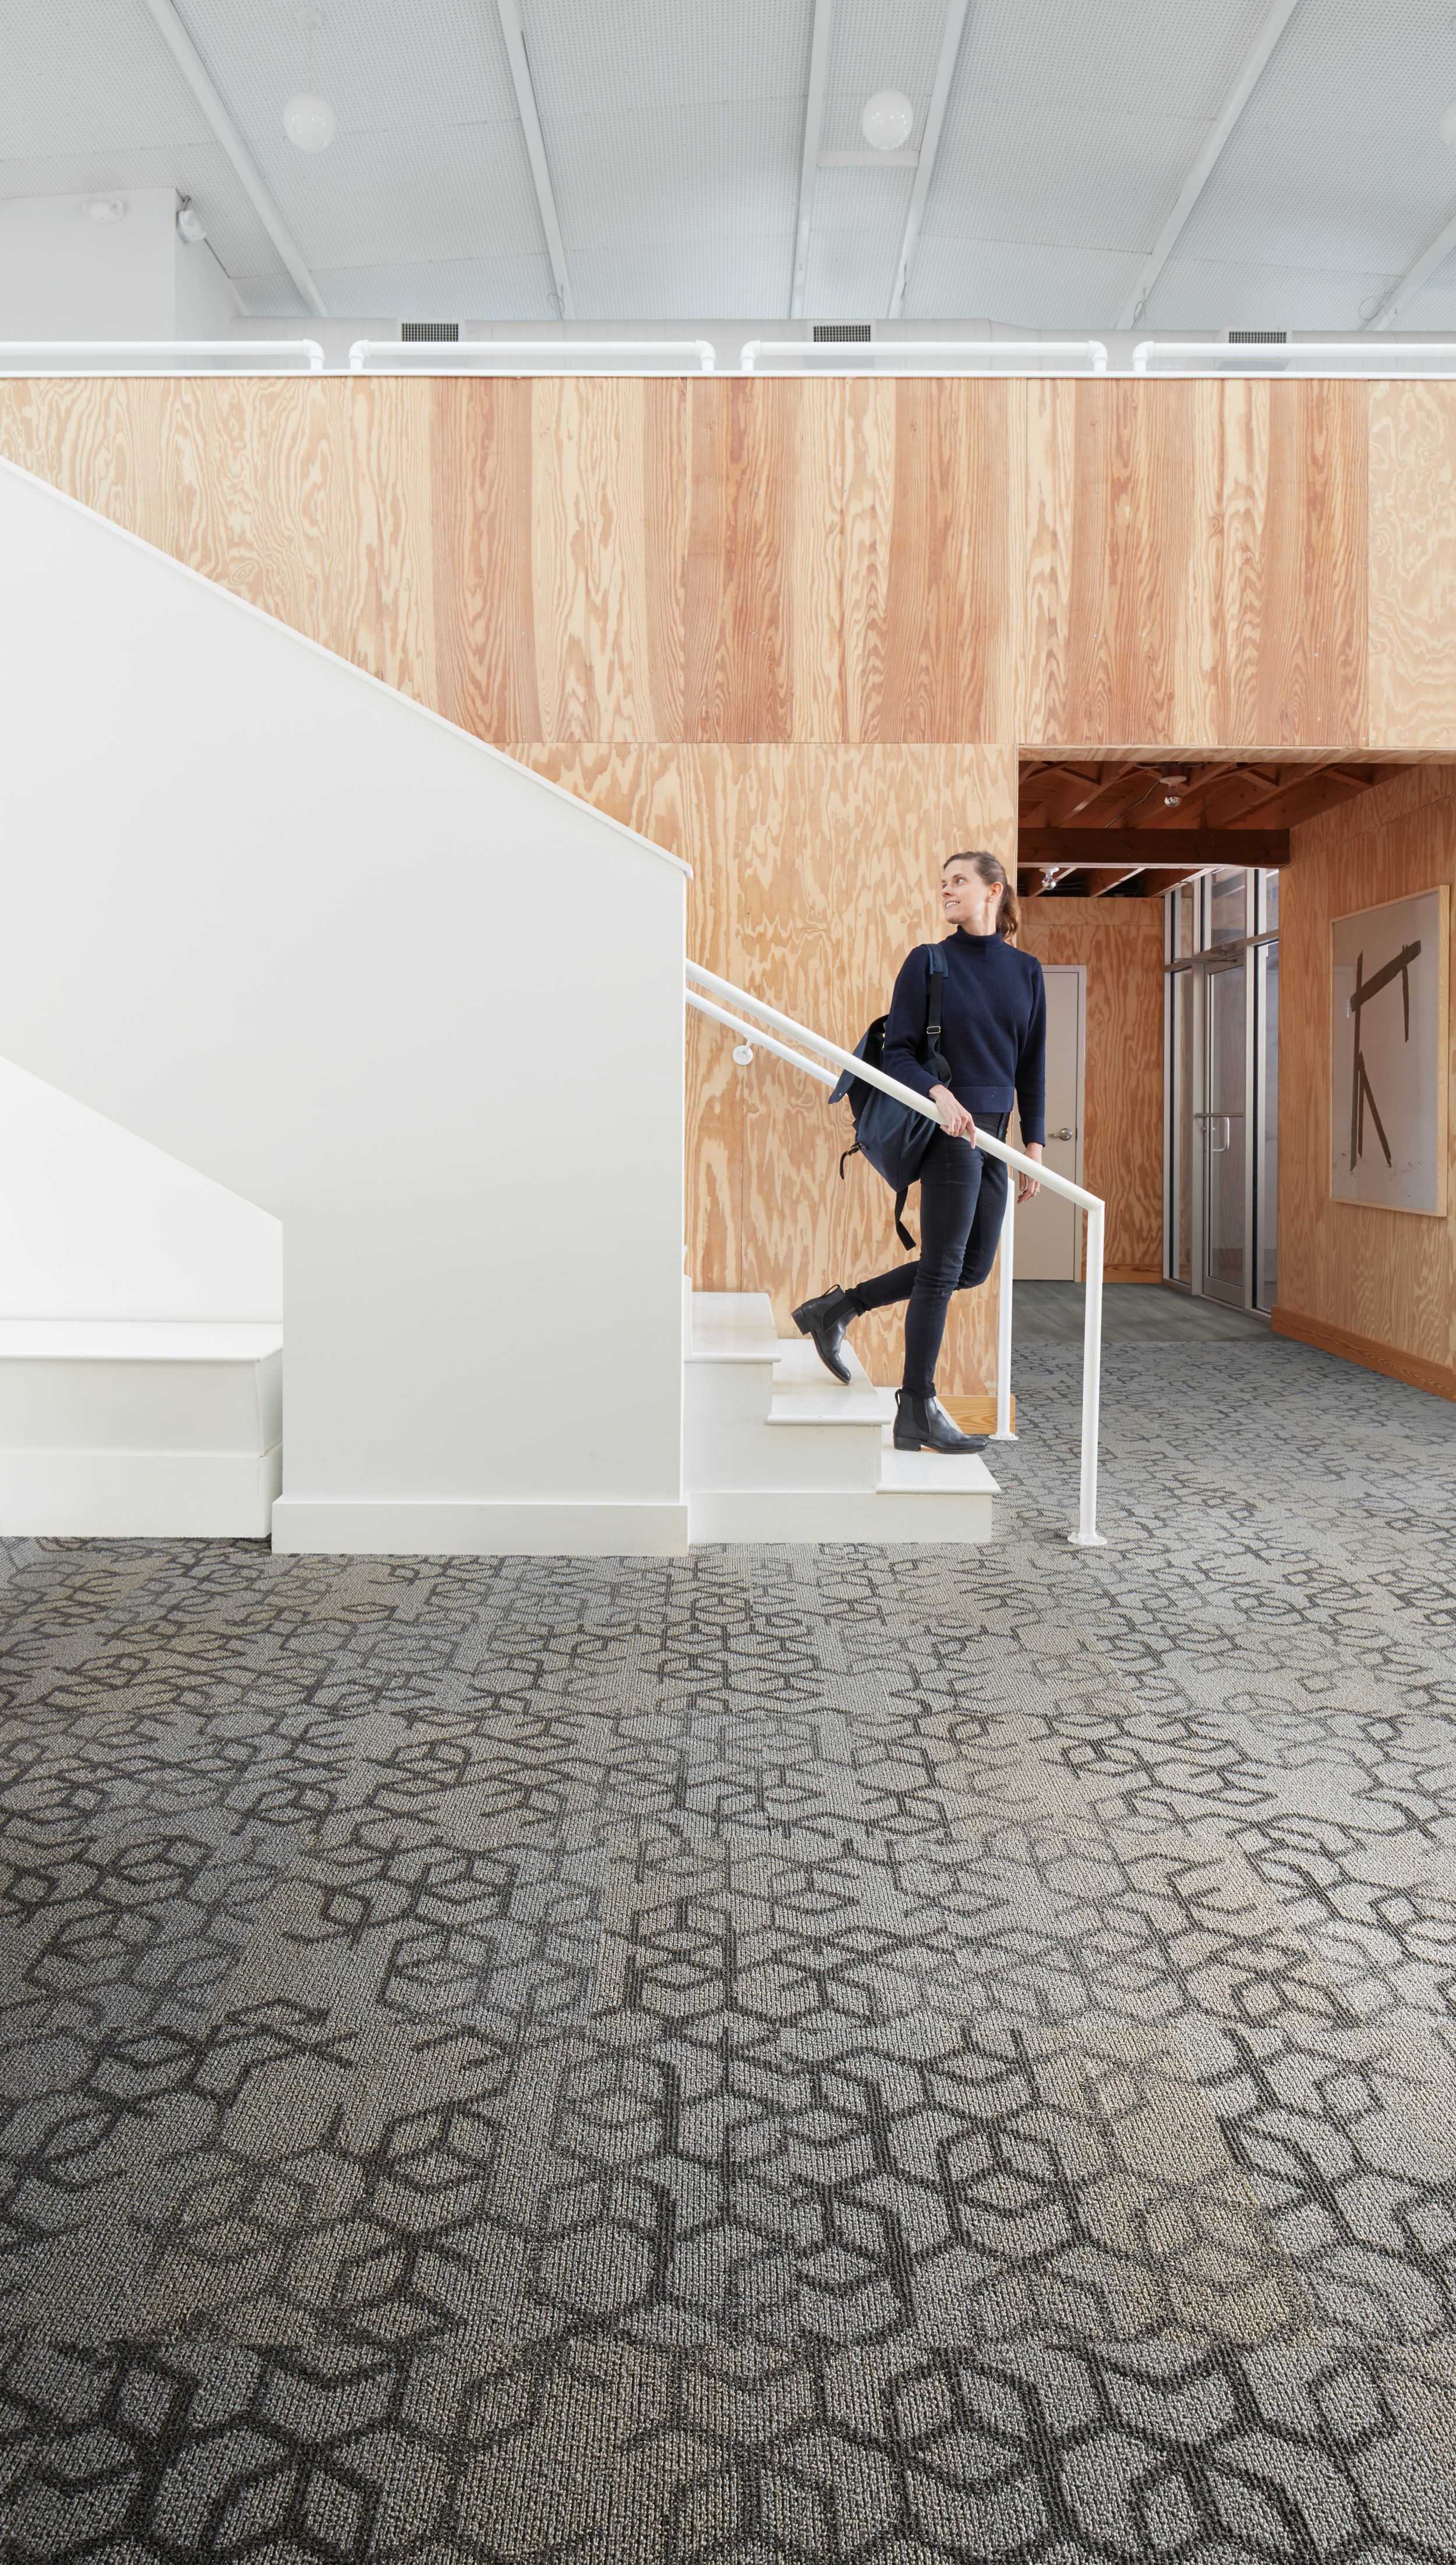 Interface Honey Do carpet tile with woman walking down open stairway and looking back numéro d’image 1